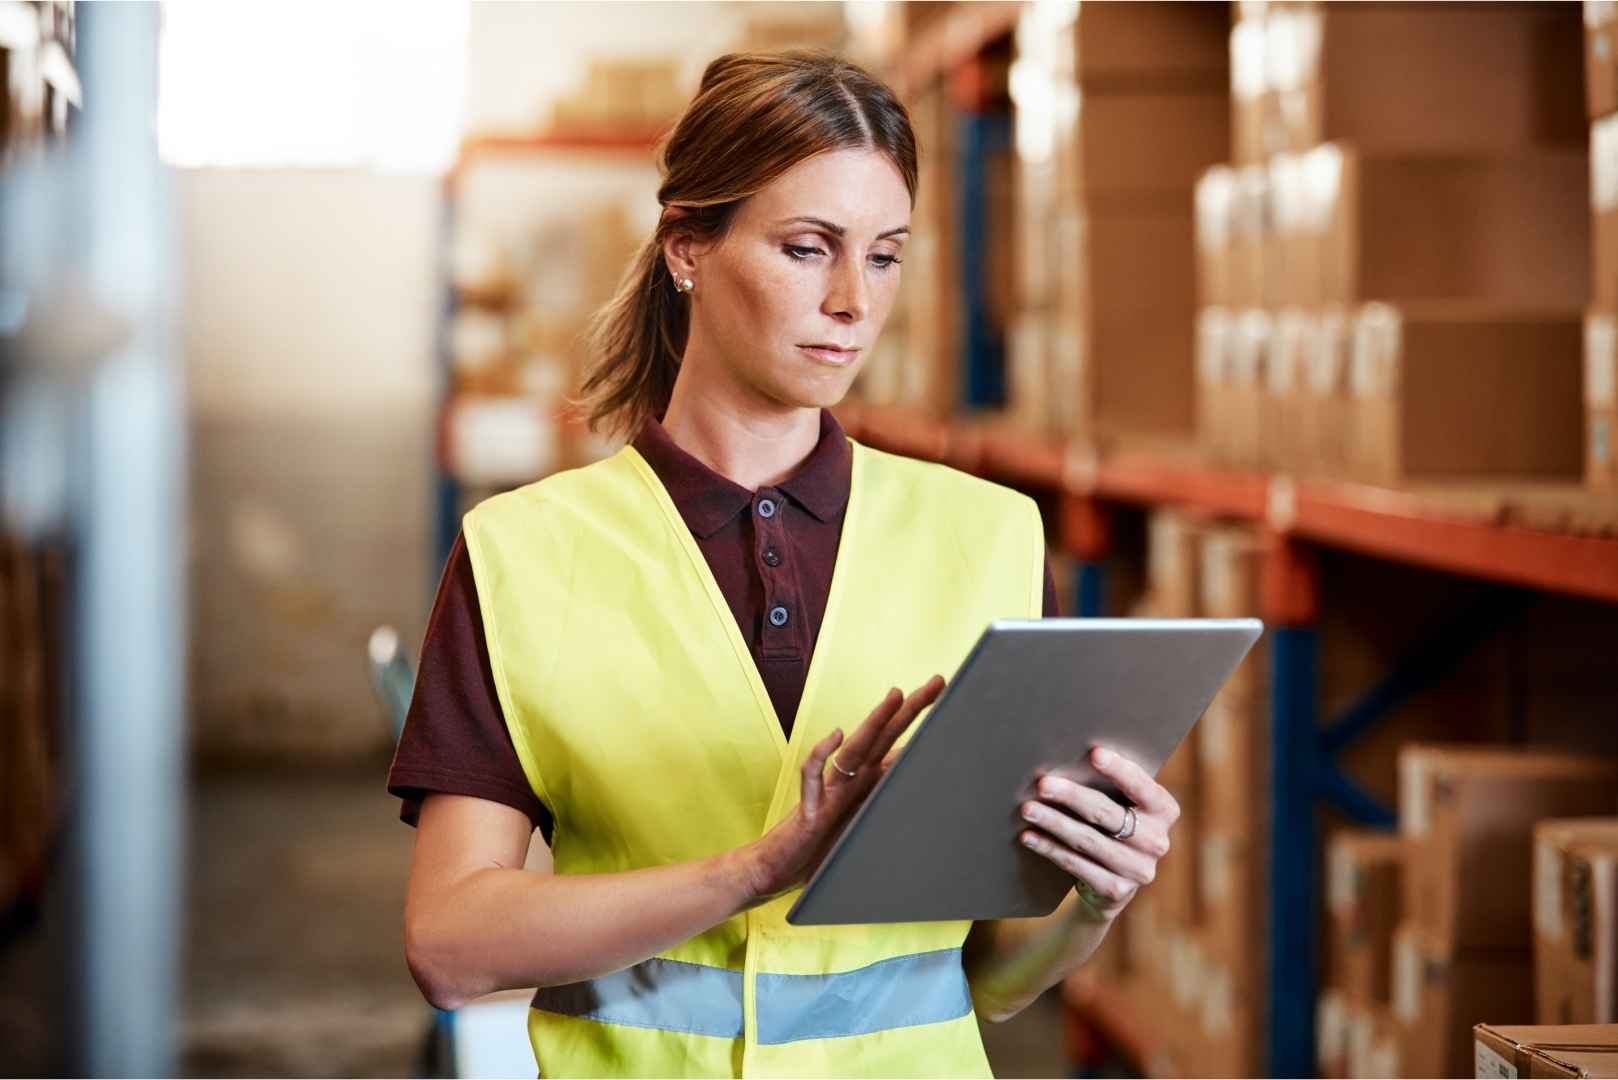 Warehouse manager checking inventories using a tablet